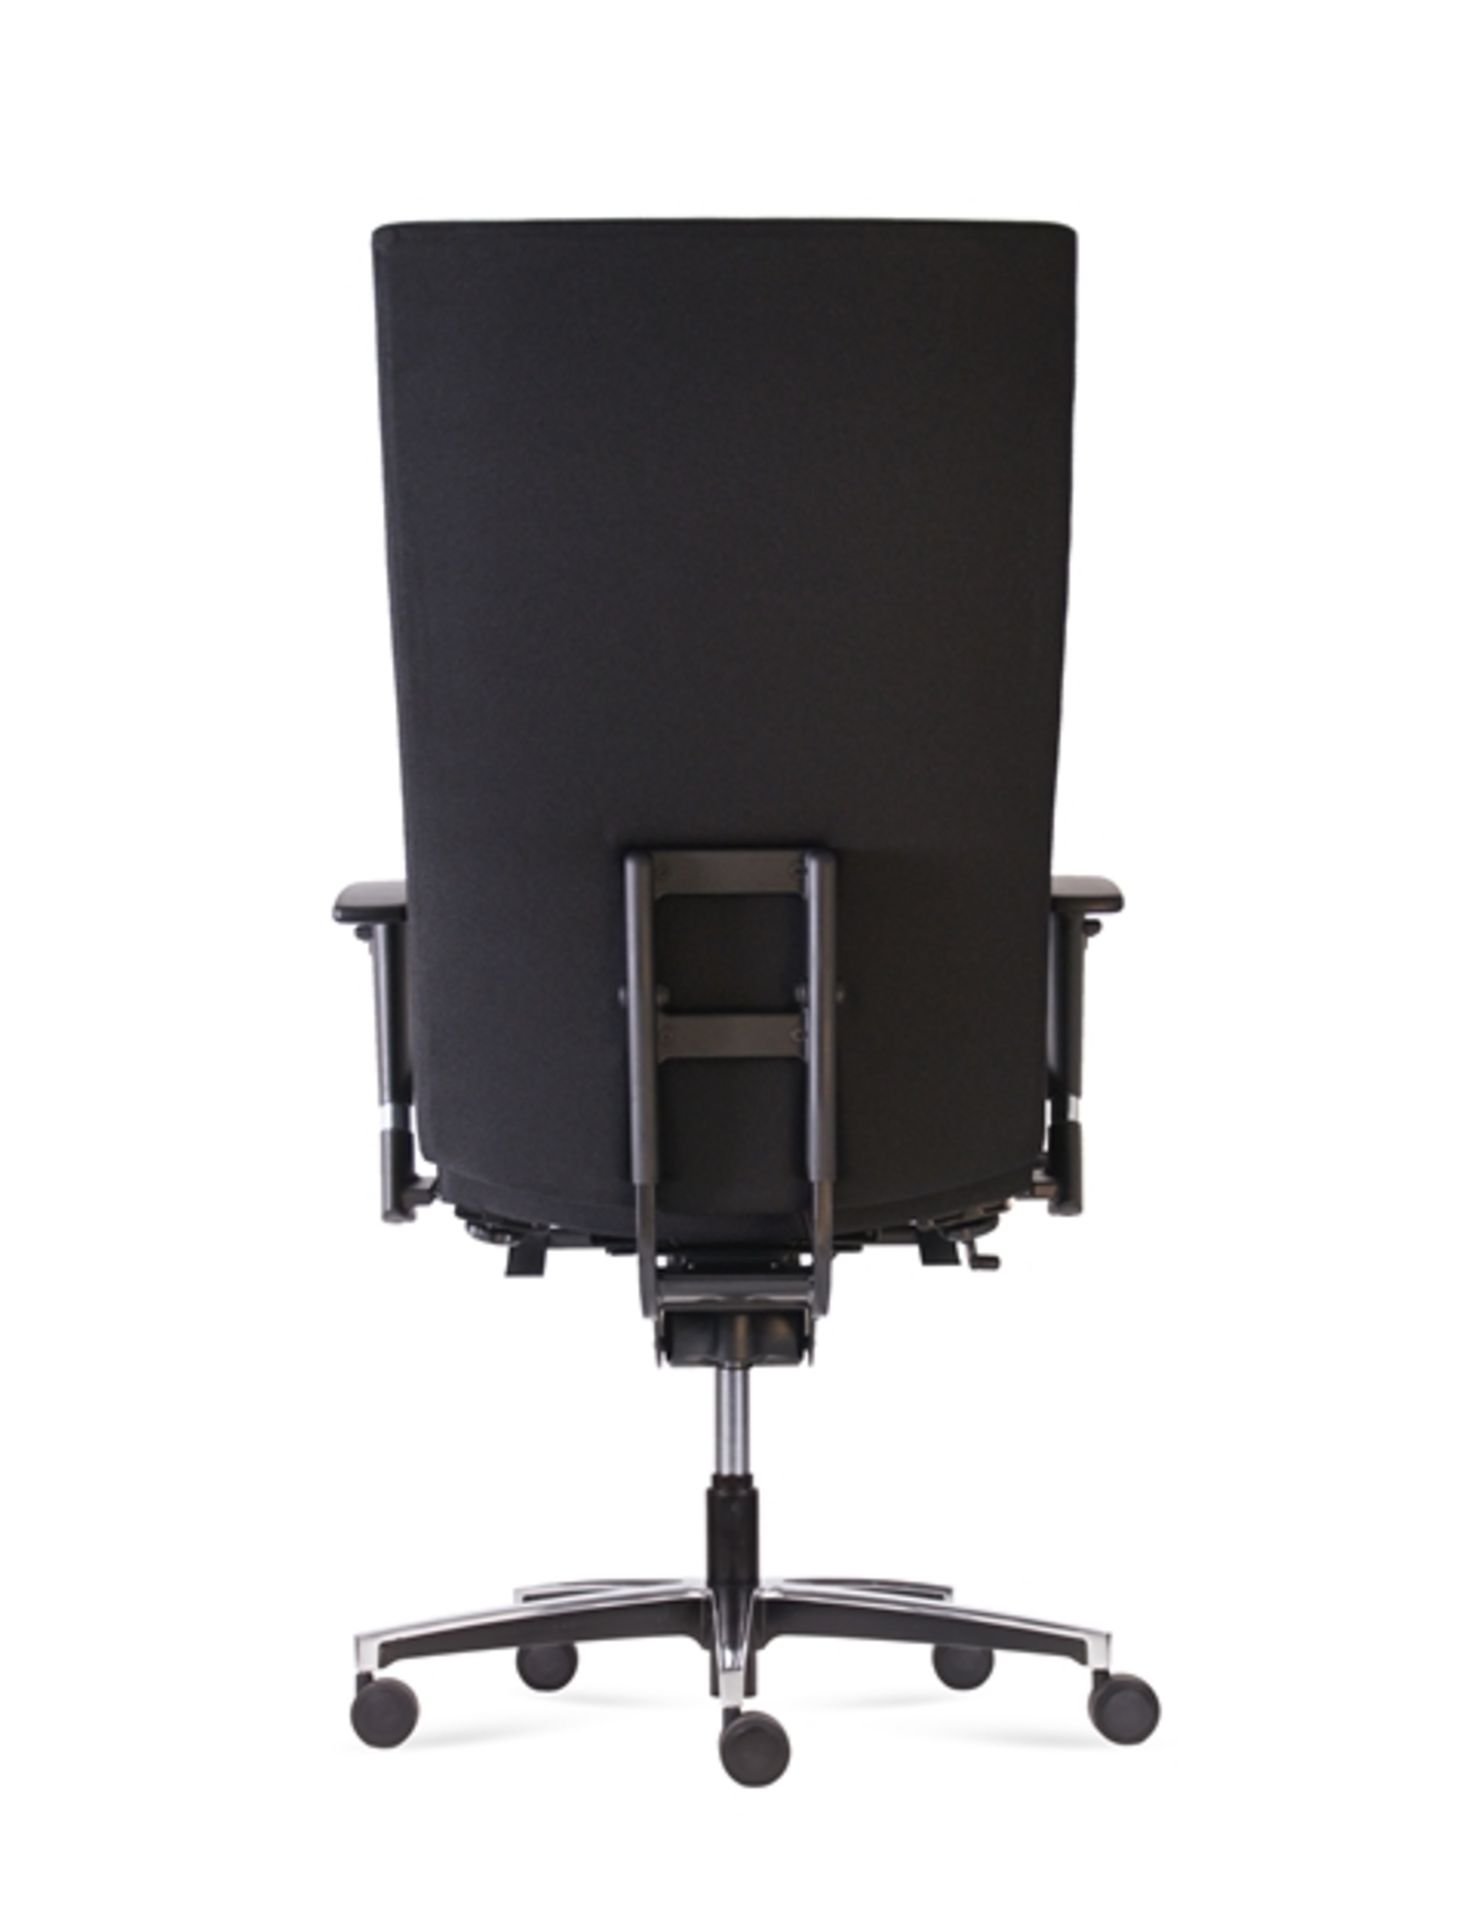 Unused ergonomic office chair in black (RRP £299) located in Stafford, viewing by appointment only - Image 6 of 6